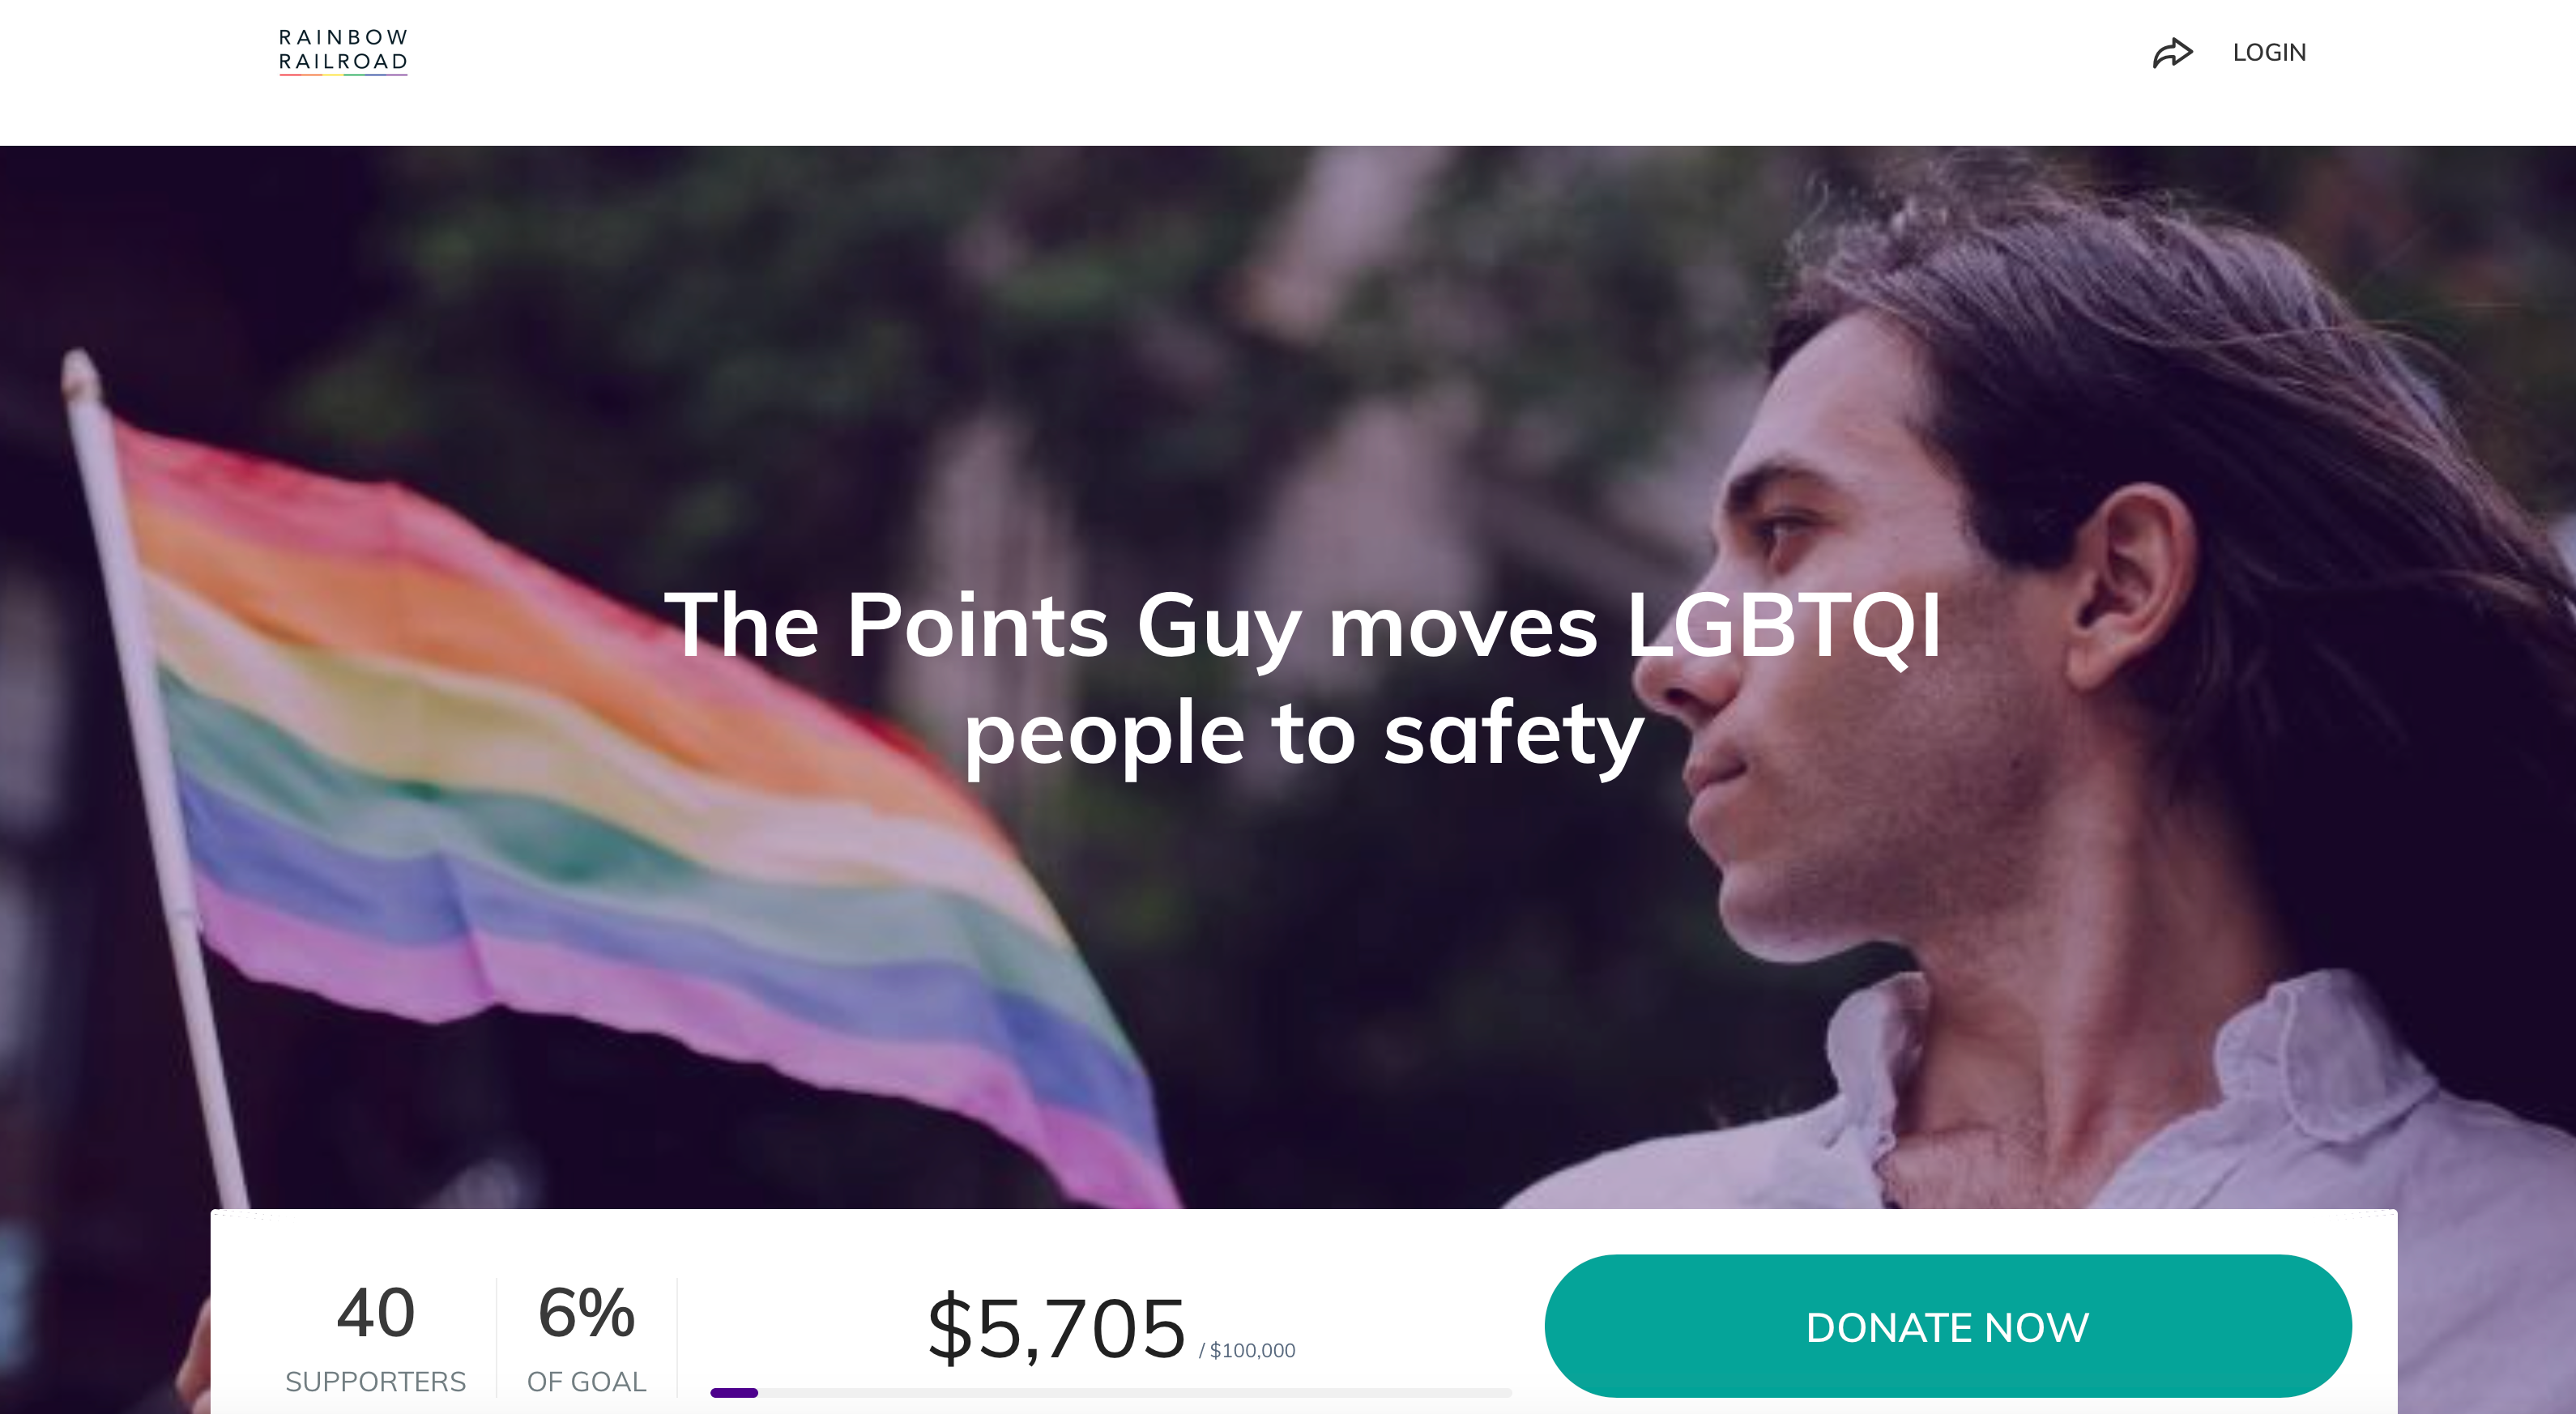 Screenshot showing the Points Guy and Rainbow Railroad charity campaign